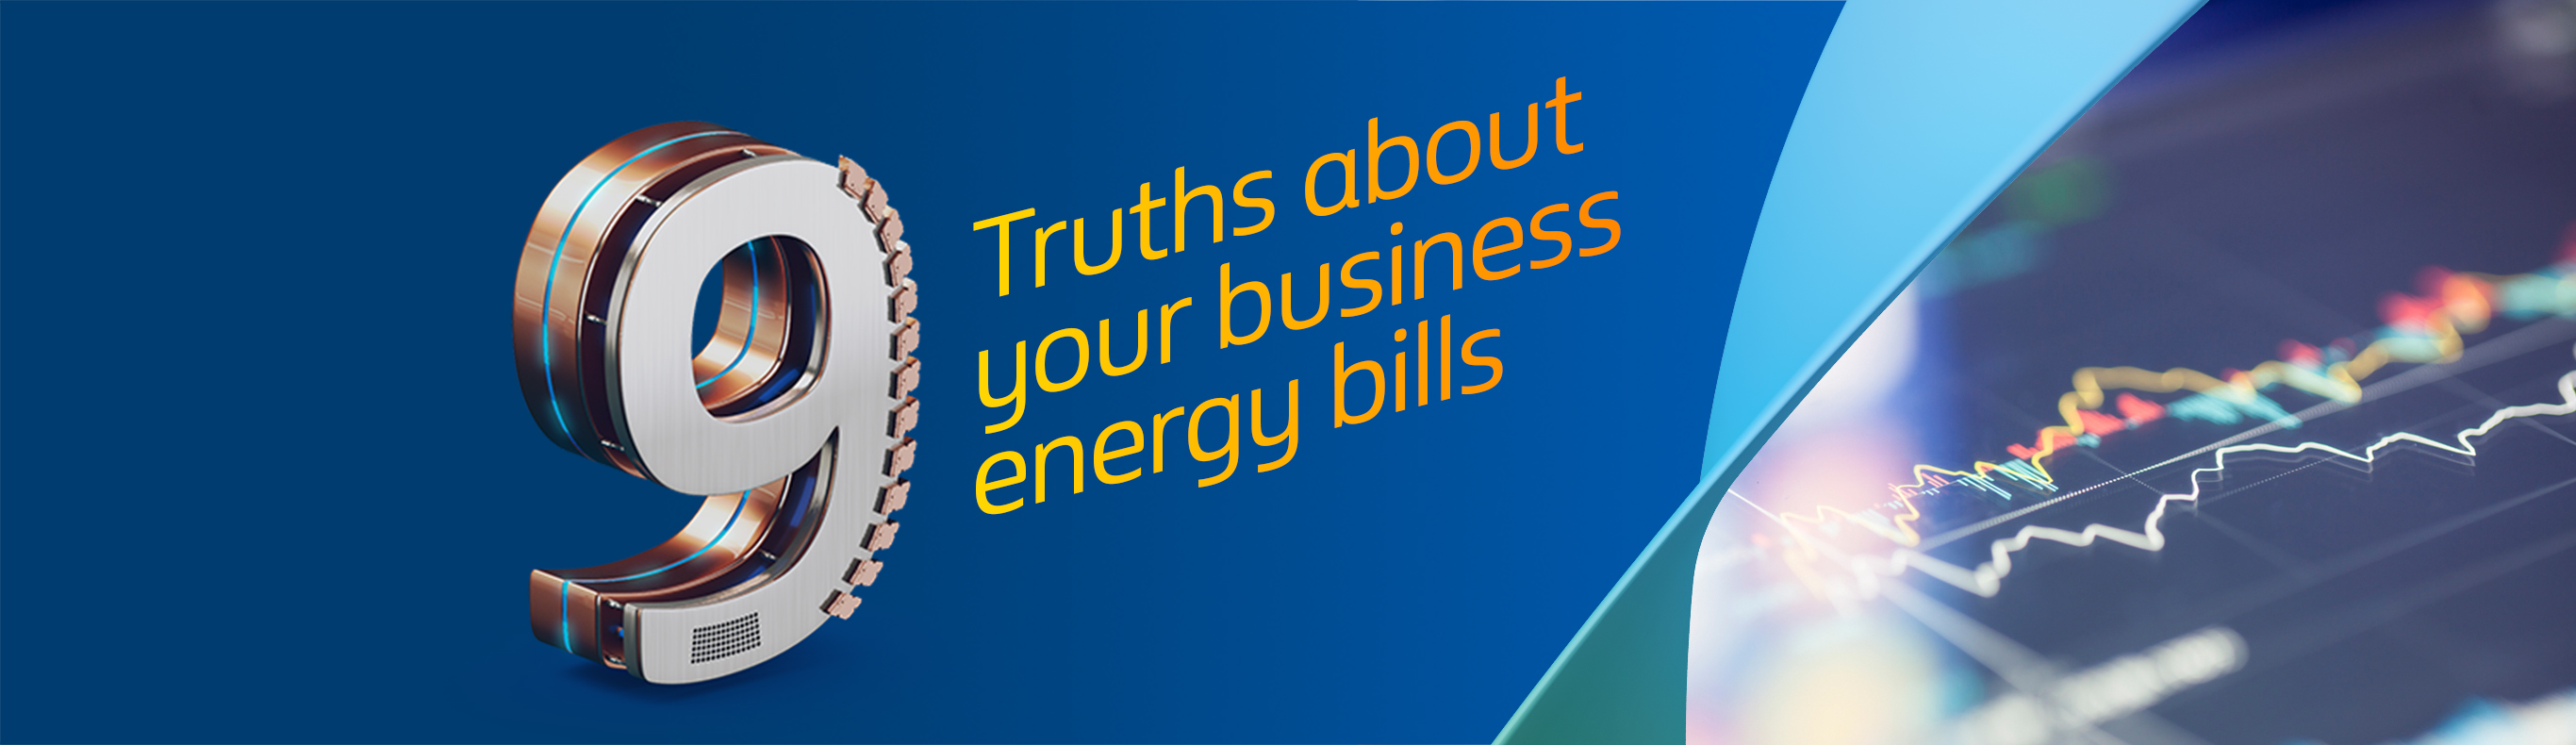 9 truths about your business energy bills